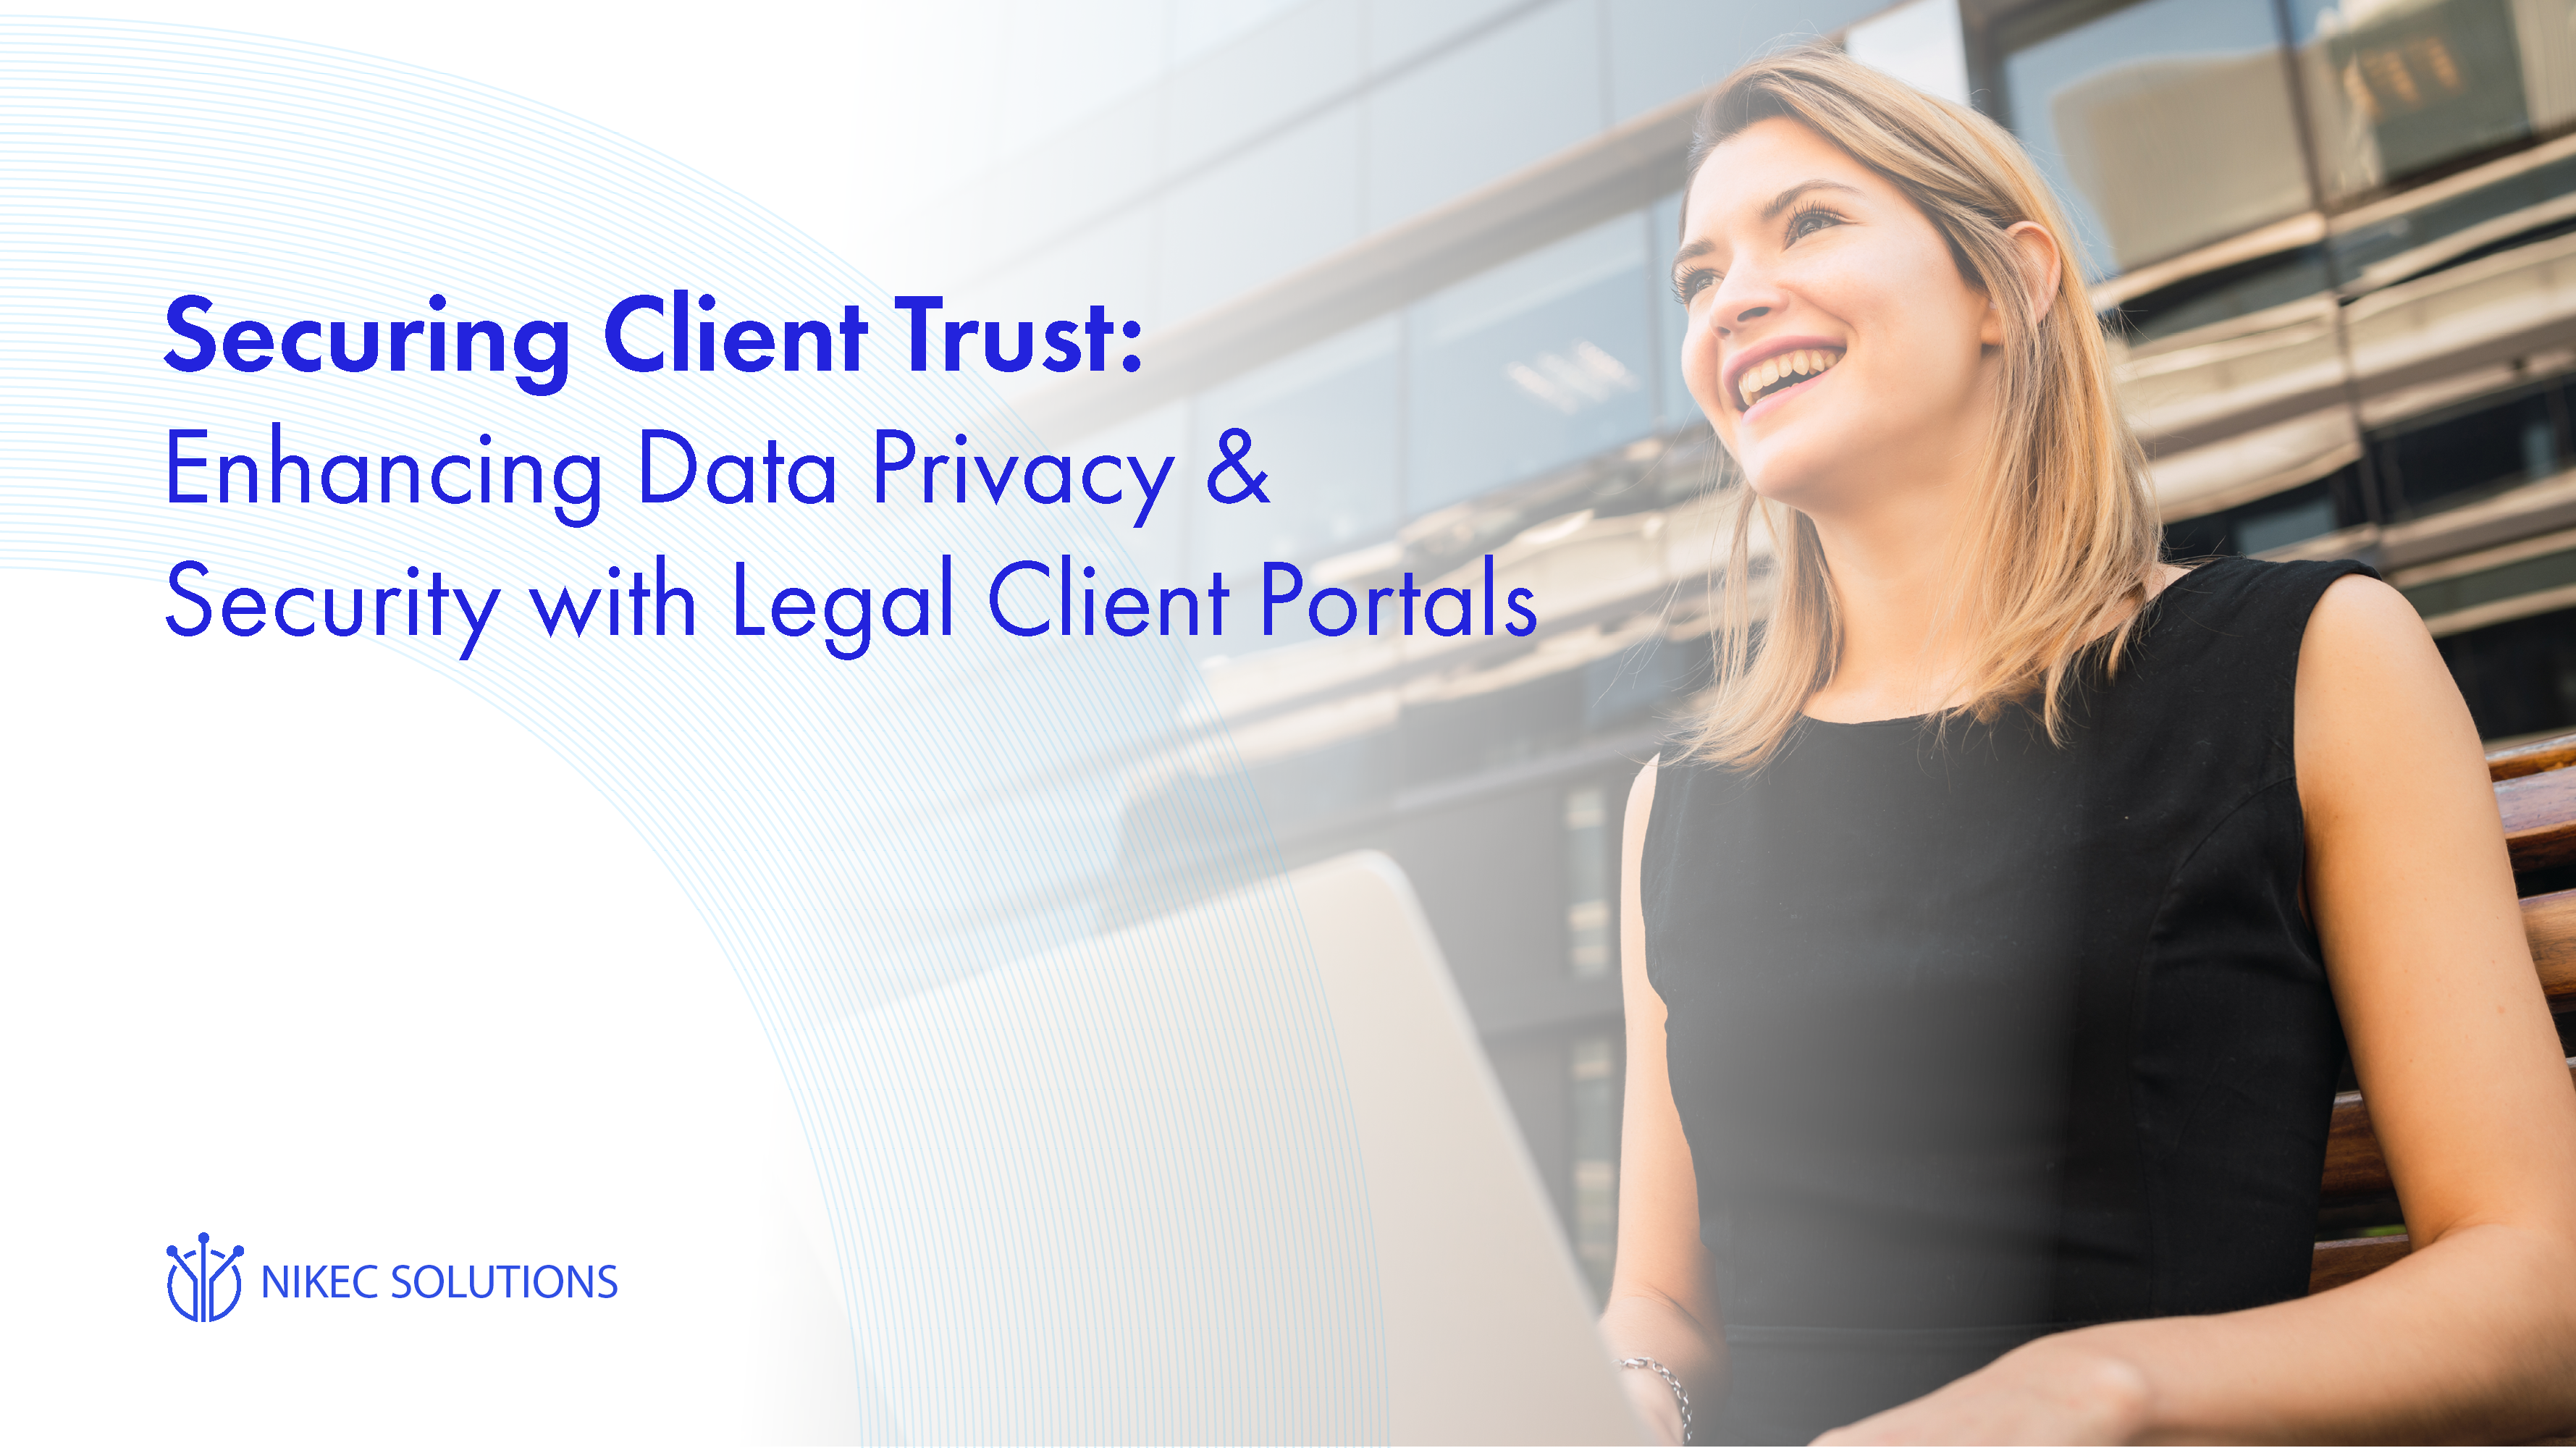 Securing Client Trust: Enhancing Data Privacy & Security with Legal Client Portals